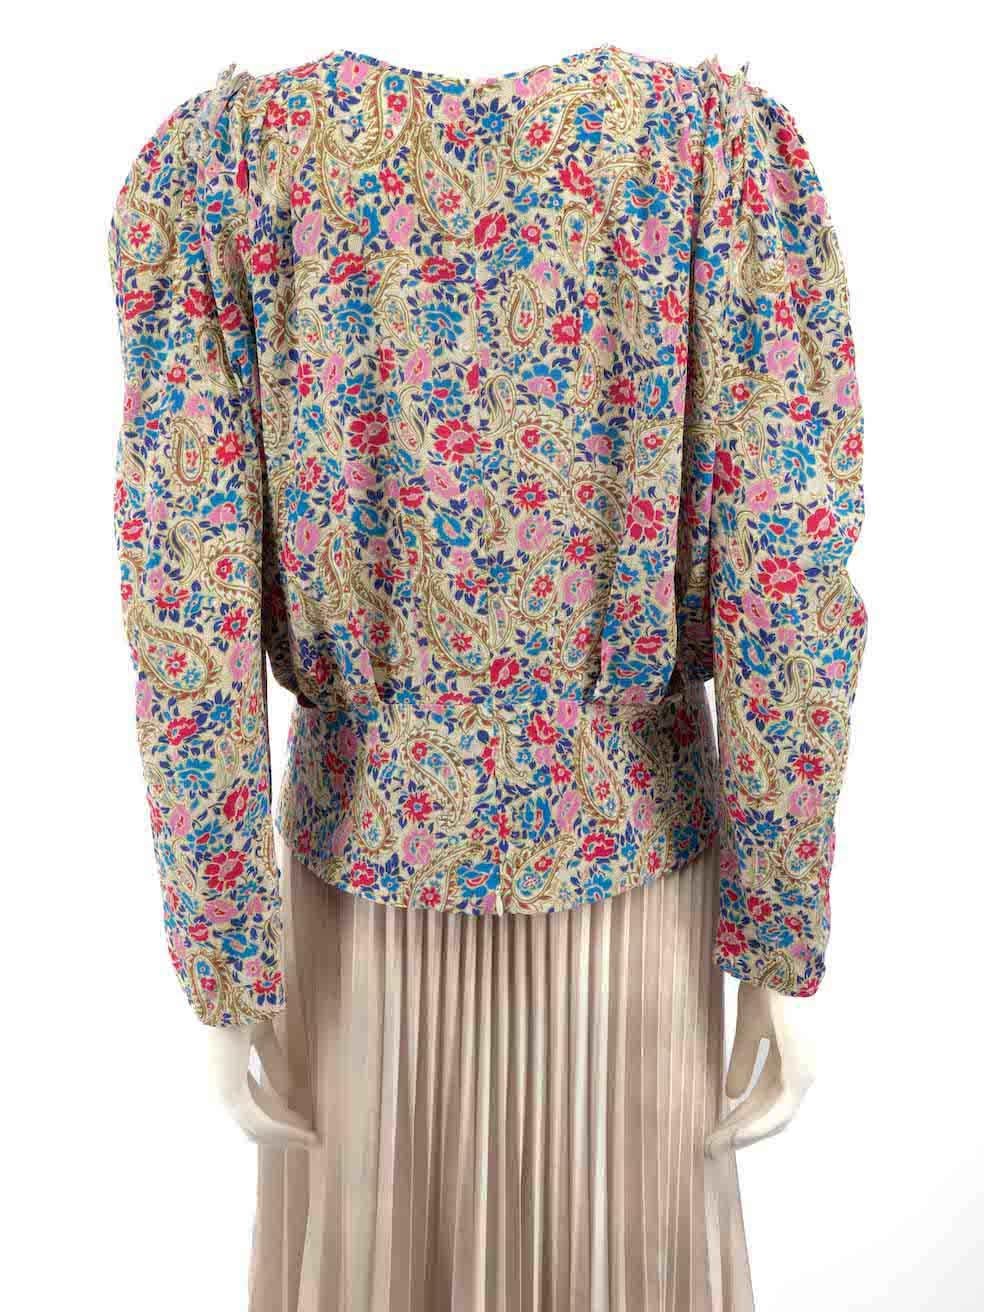 Isabel Marant Floral Paisley Print Top Size XL In Good Condition For Sale In London, GB